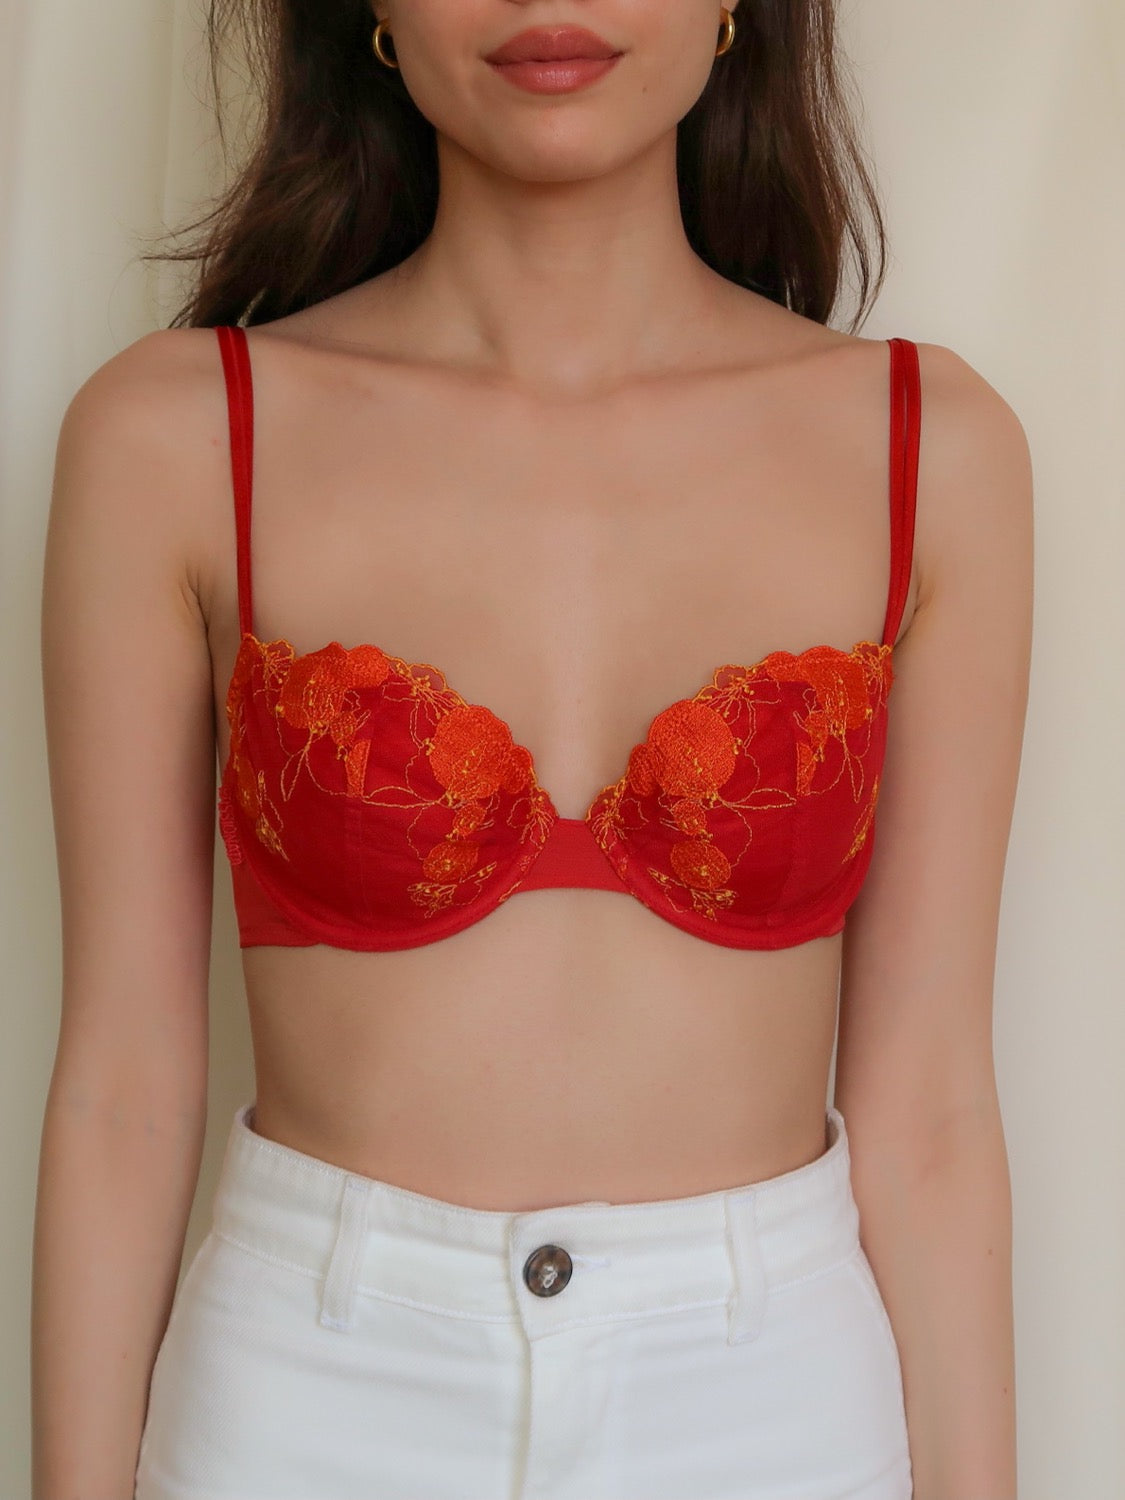 VINTAGE RED UNDERWIRE PADDED FRENCH BRALETTE - (36B/34C/32D)